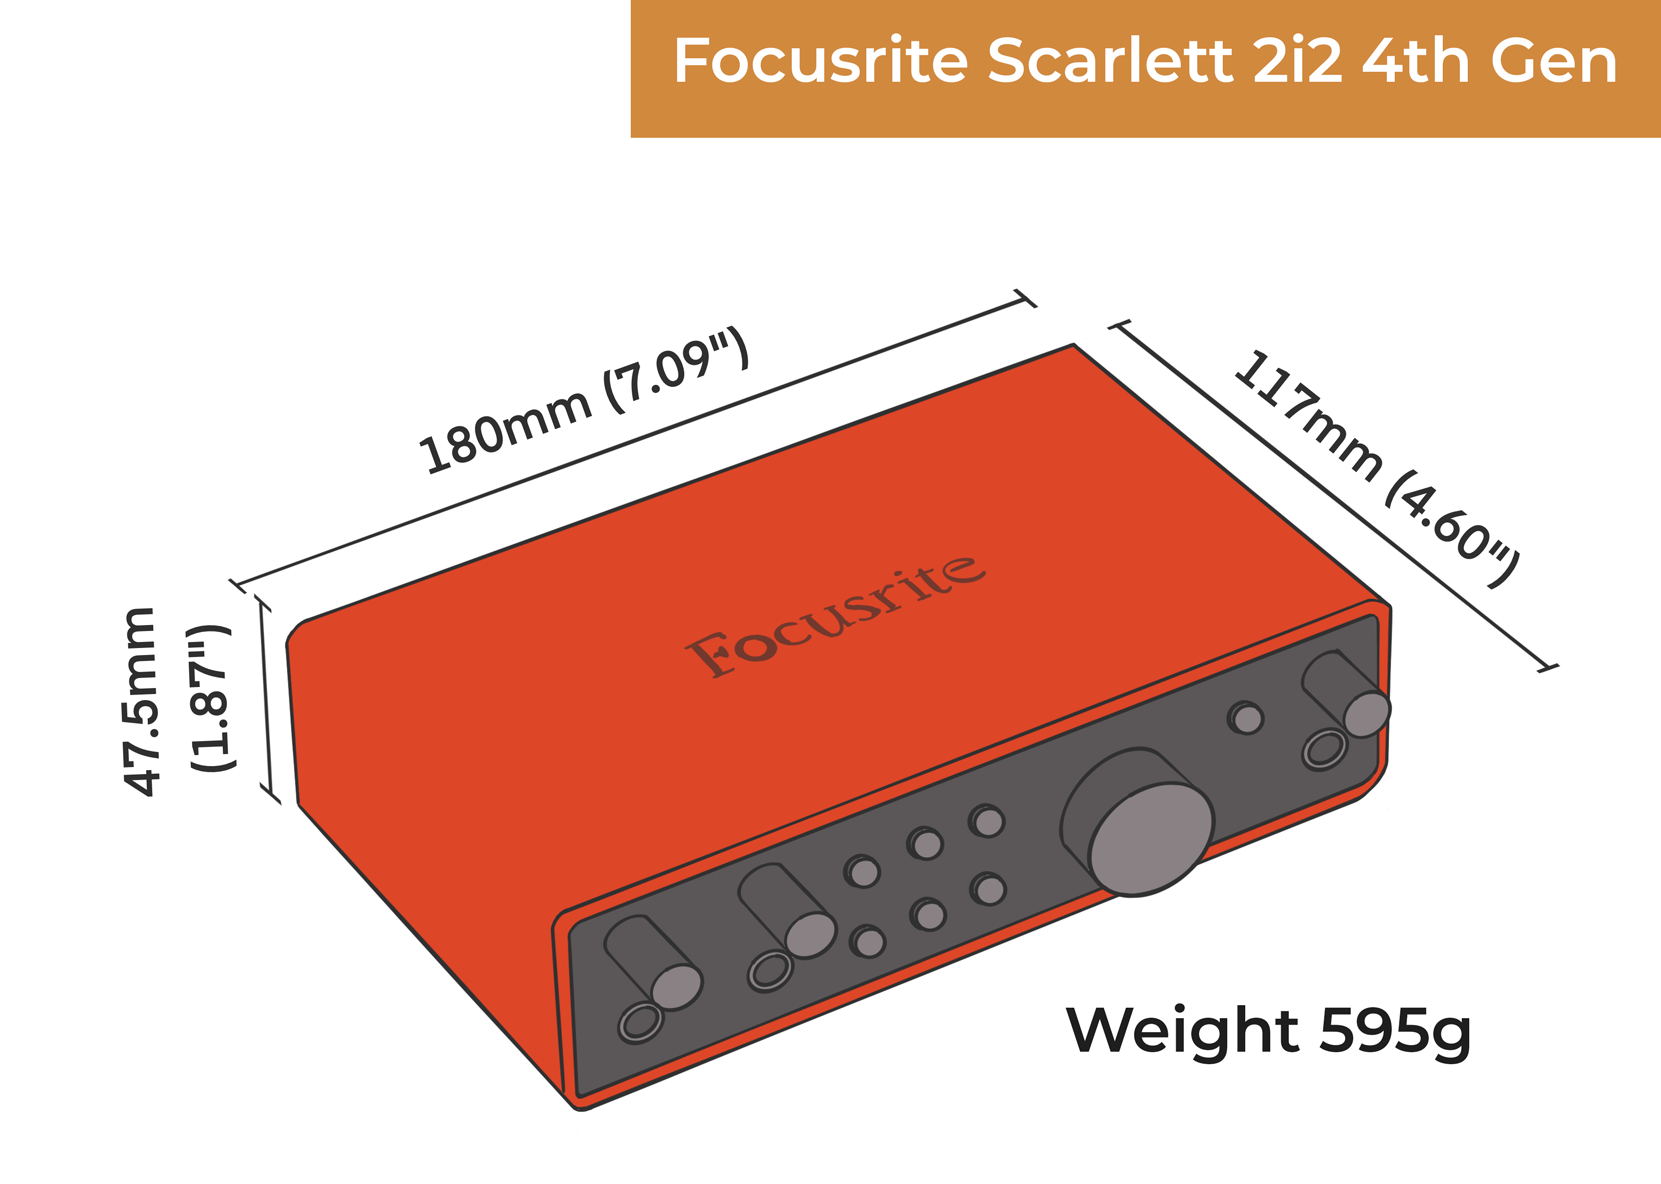 Focusrite Scarlett 2i2 dimensions and weight